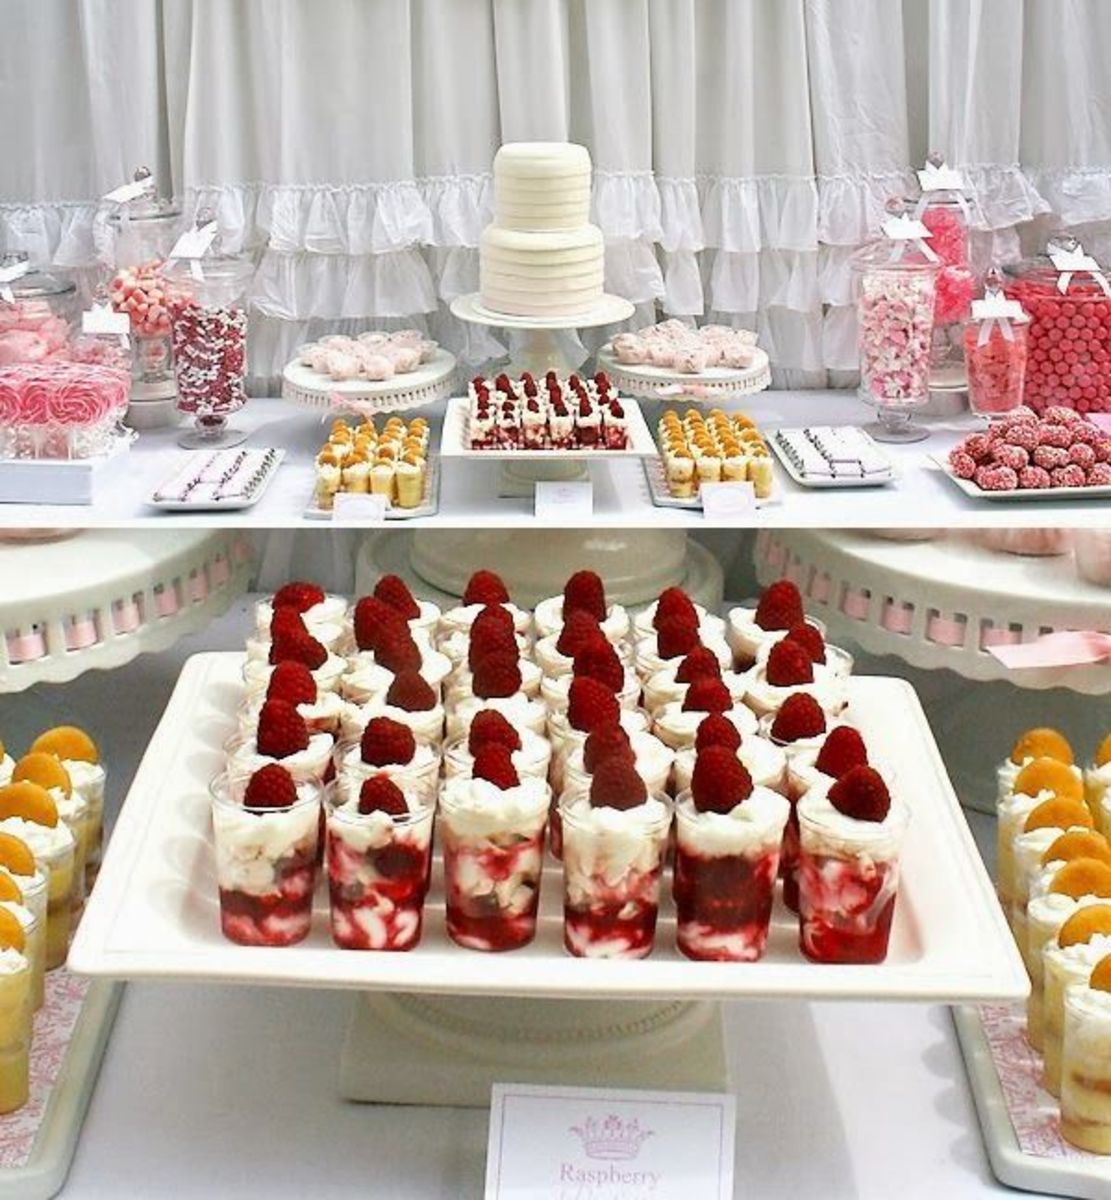 A lovely selection of desserts adds fun to every bridal shower